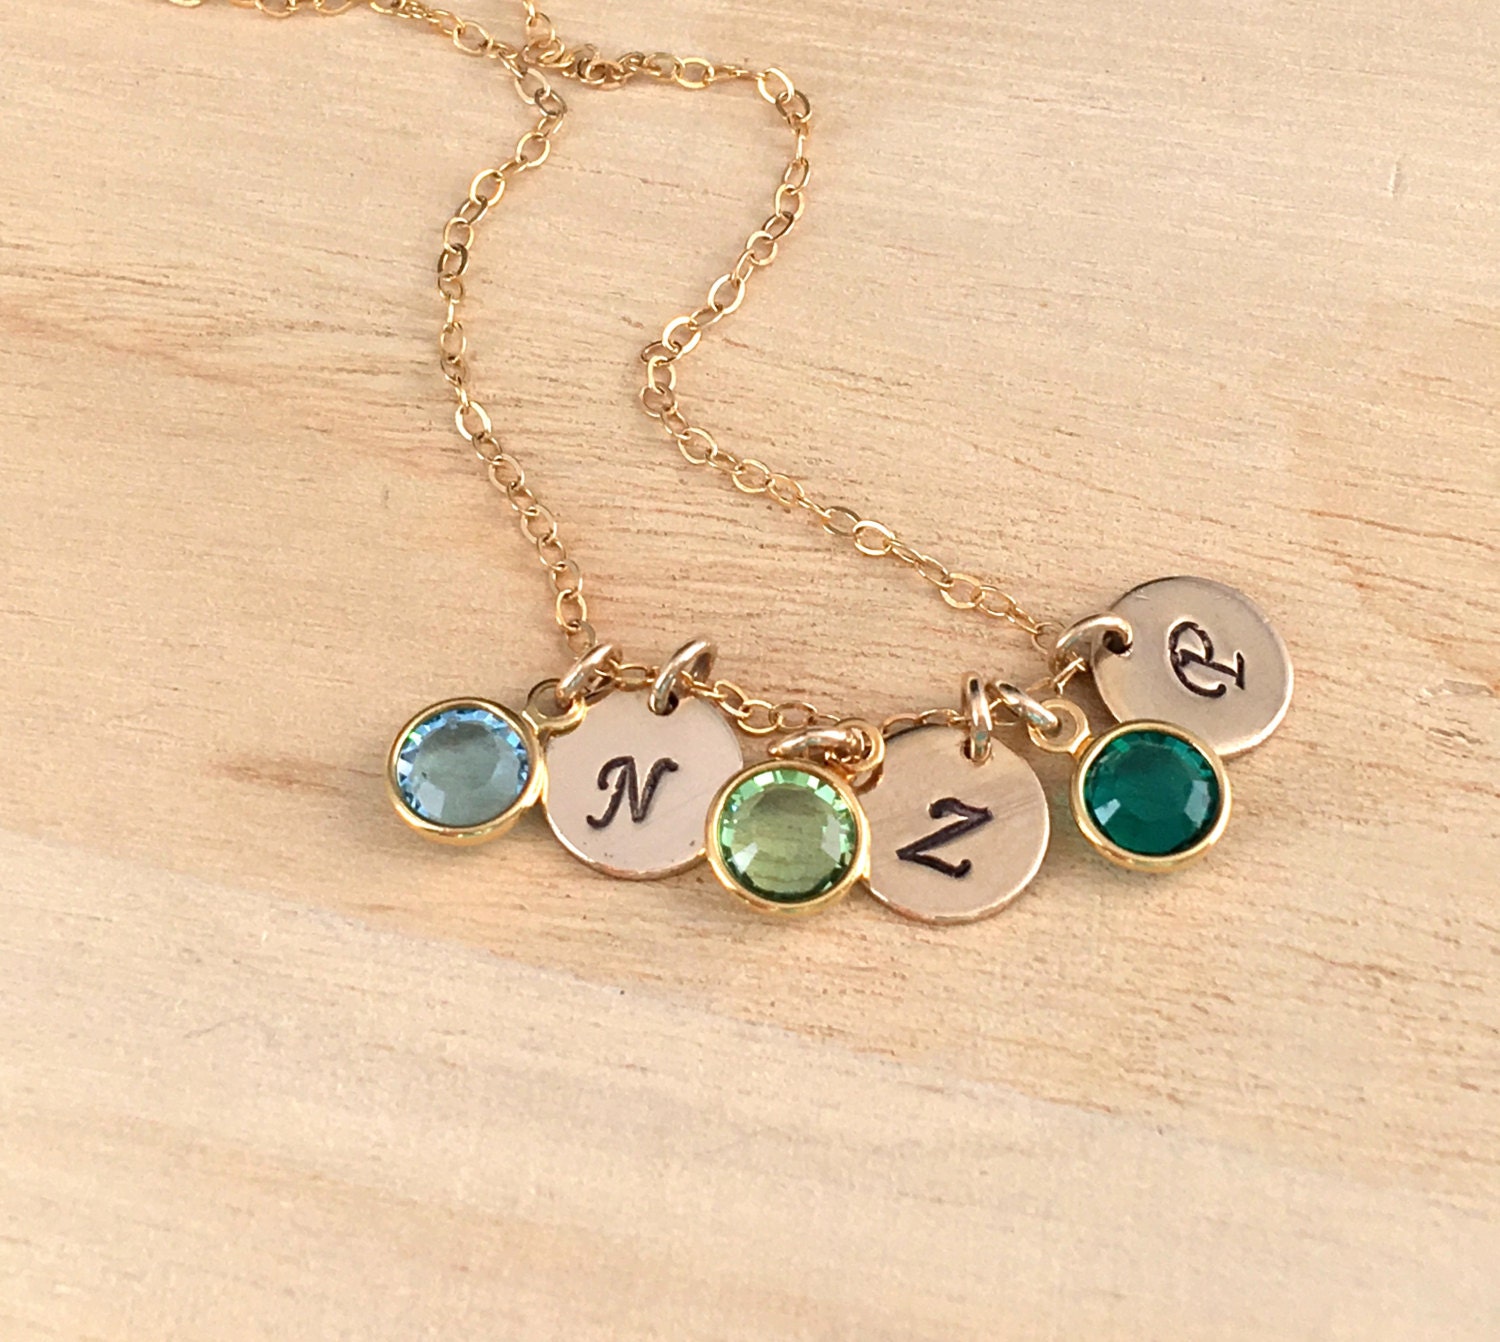 Birthstone Initial Necklace, Gold Filled Personalized Sterling Silver Necklace, Birthstone Crystal Necklace, Handstamped Disc Necklace,